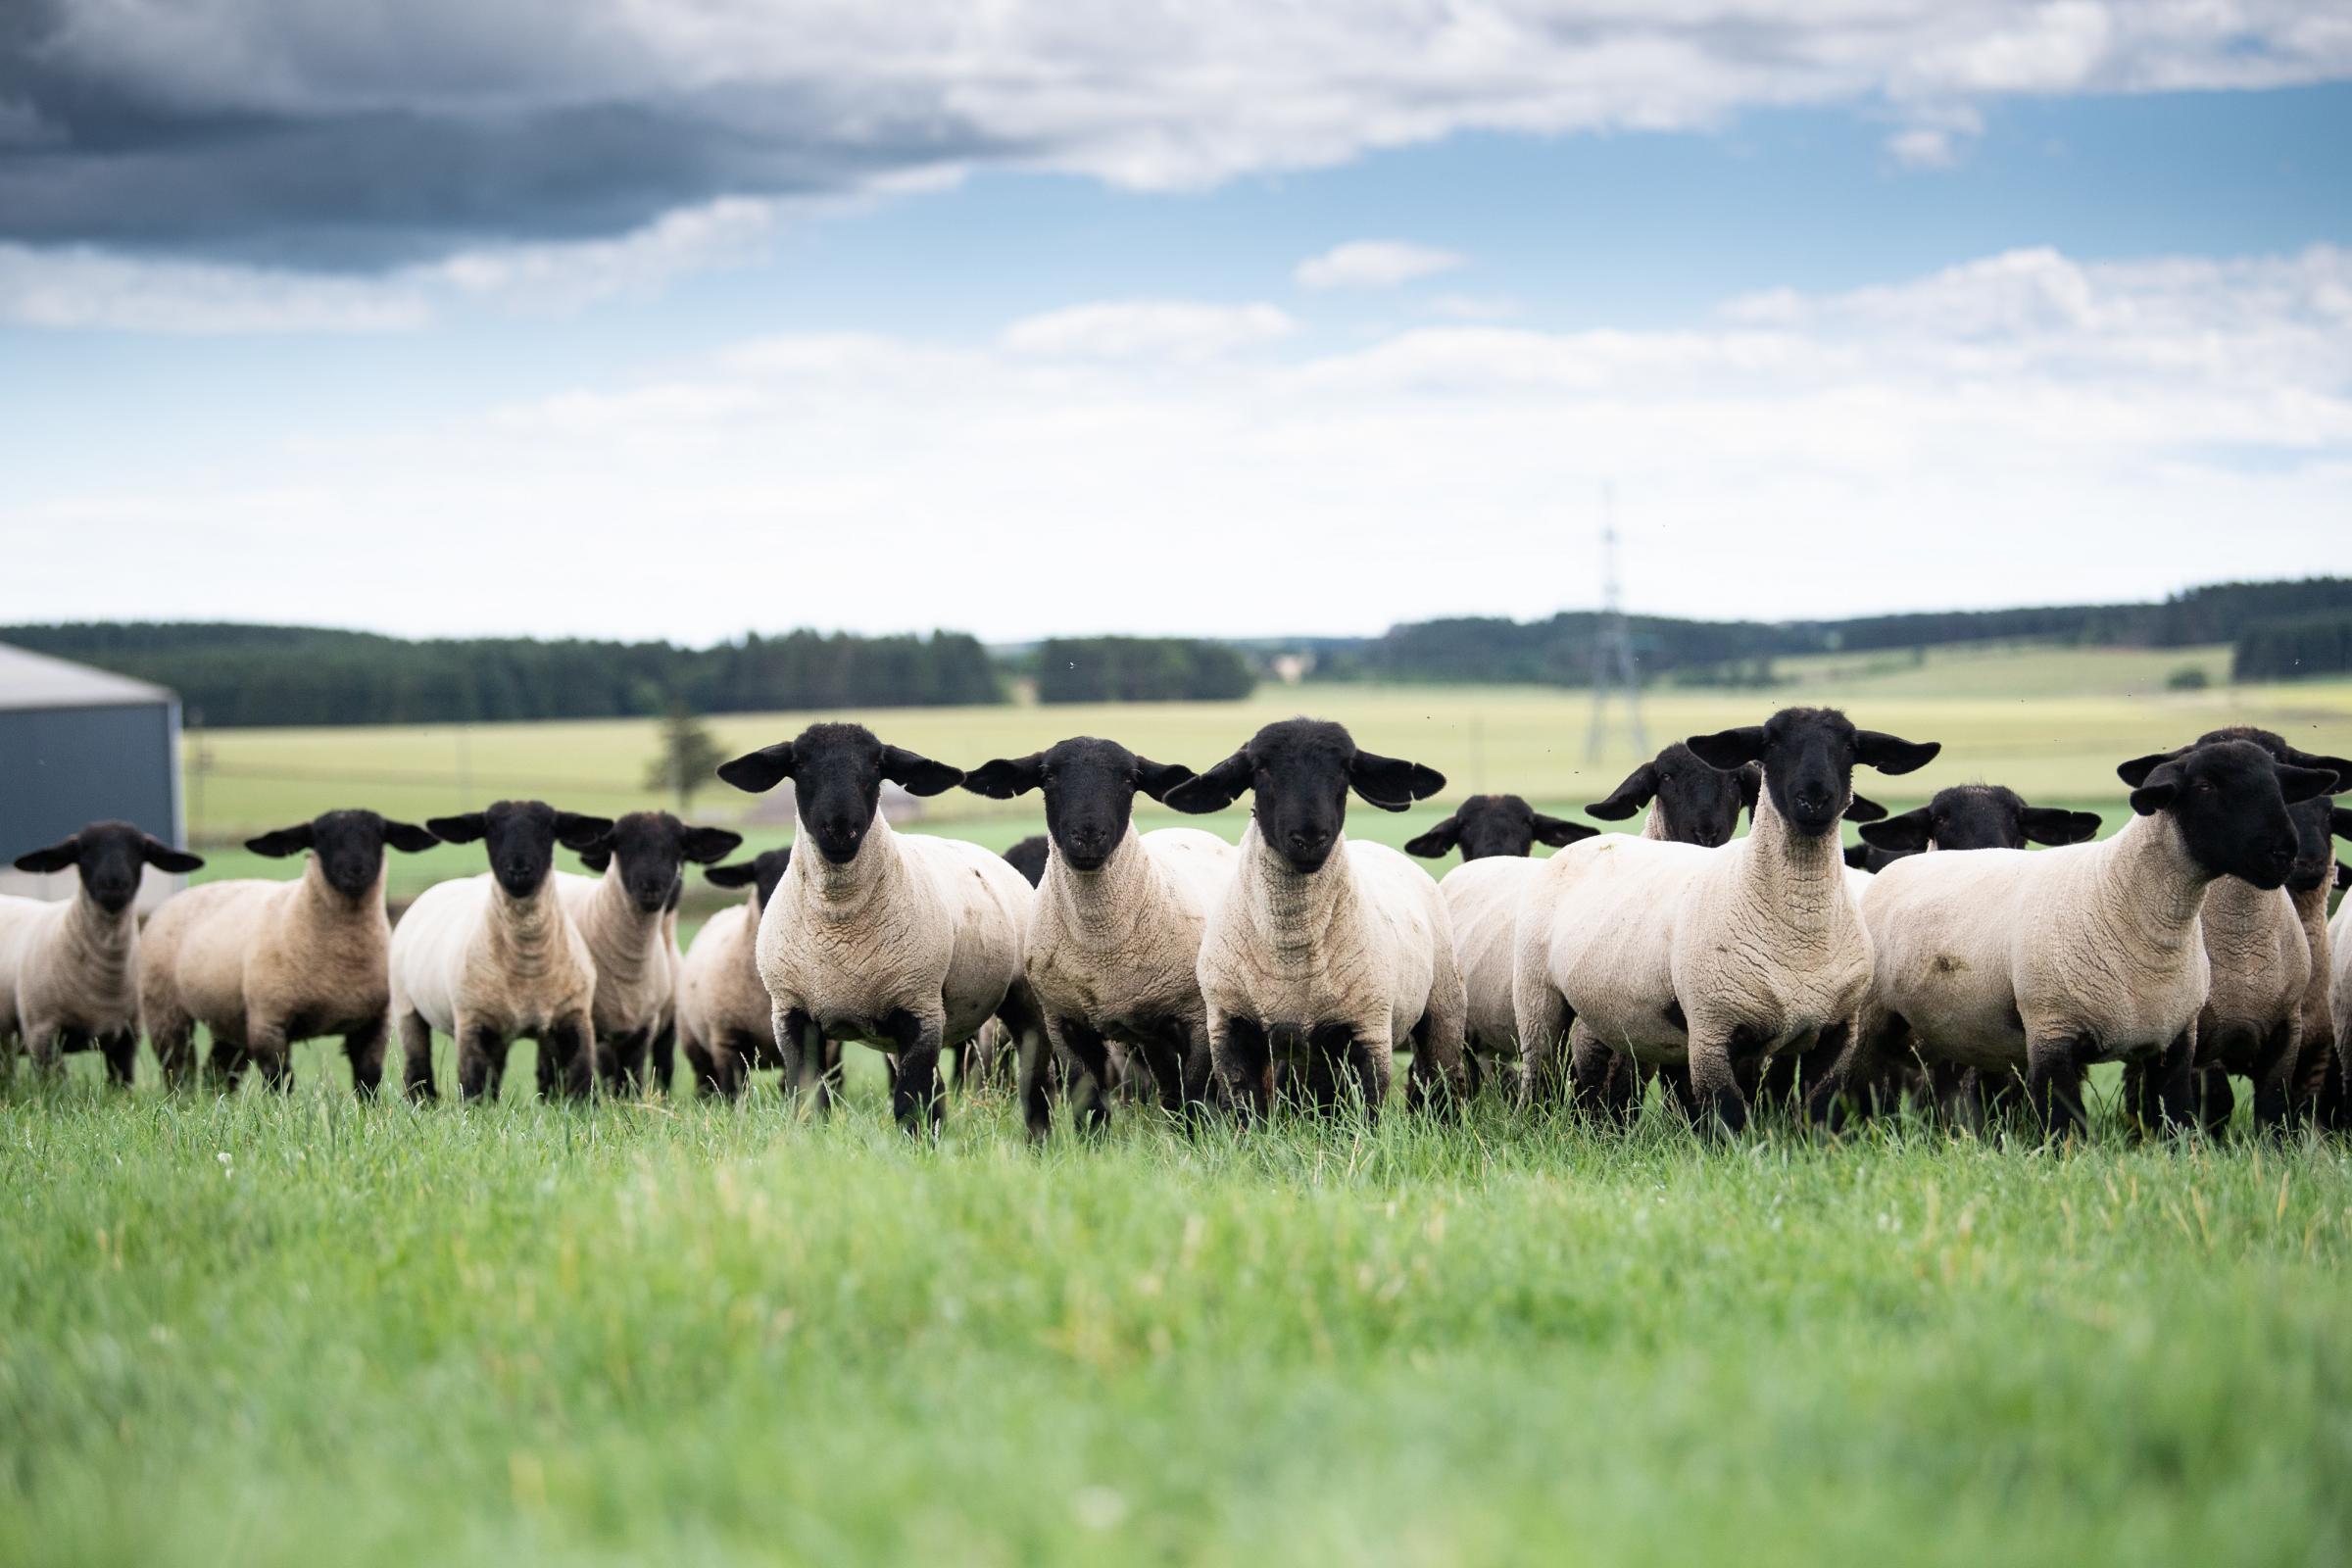 At Birness they dont flush any of their females or line breed. Instead, they prefer to breed good, sound commercial sheep with good fleshing ability, by selecting new stock rams to correct any faults in their ewes Ref:RH080722054 Rob Haining / The